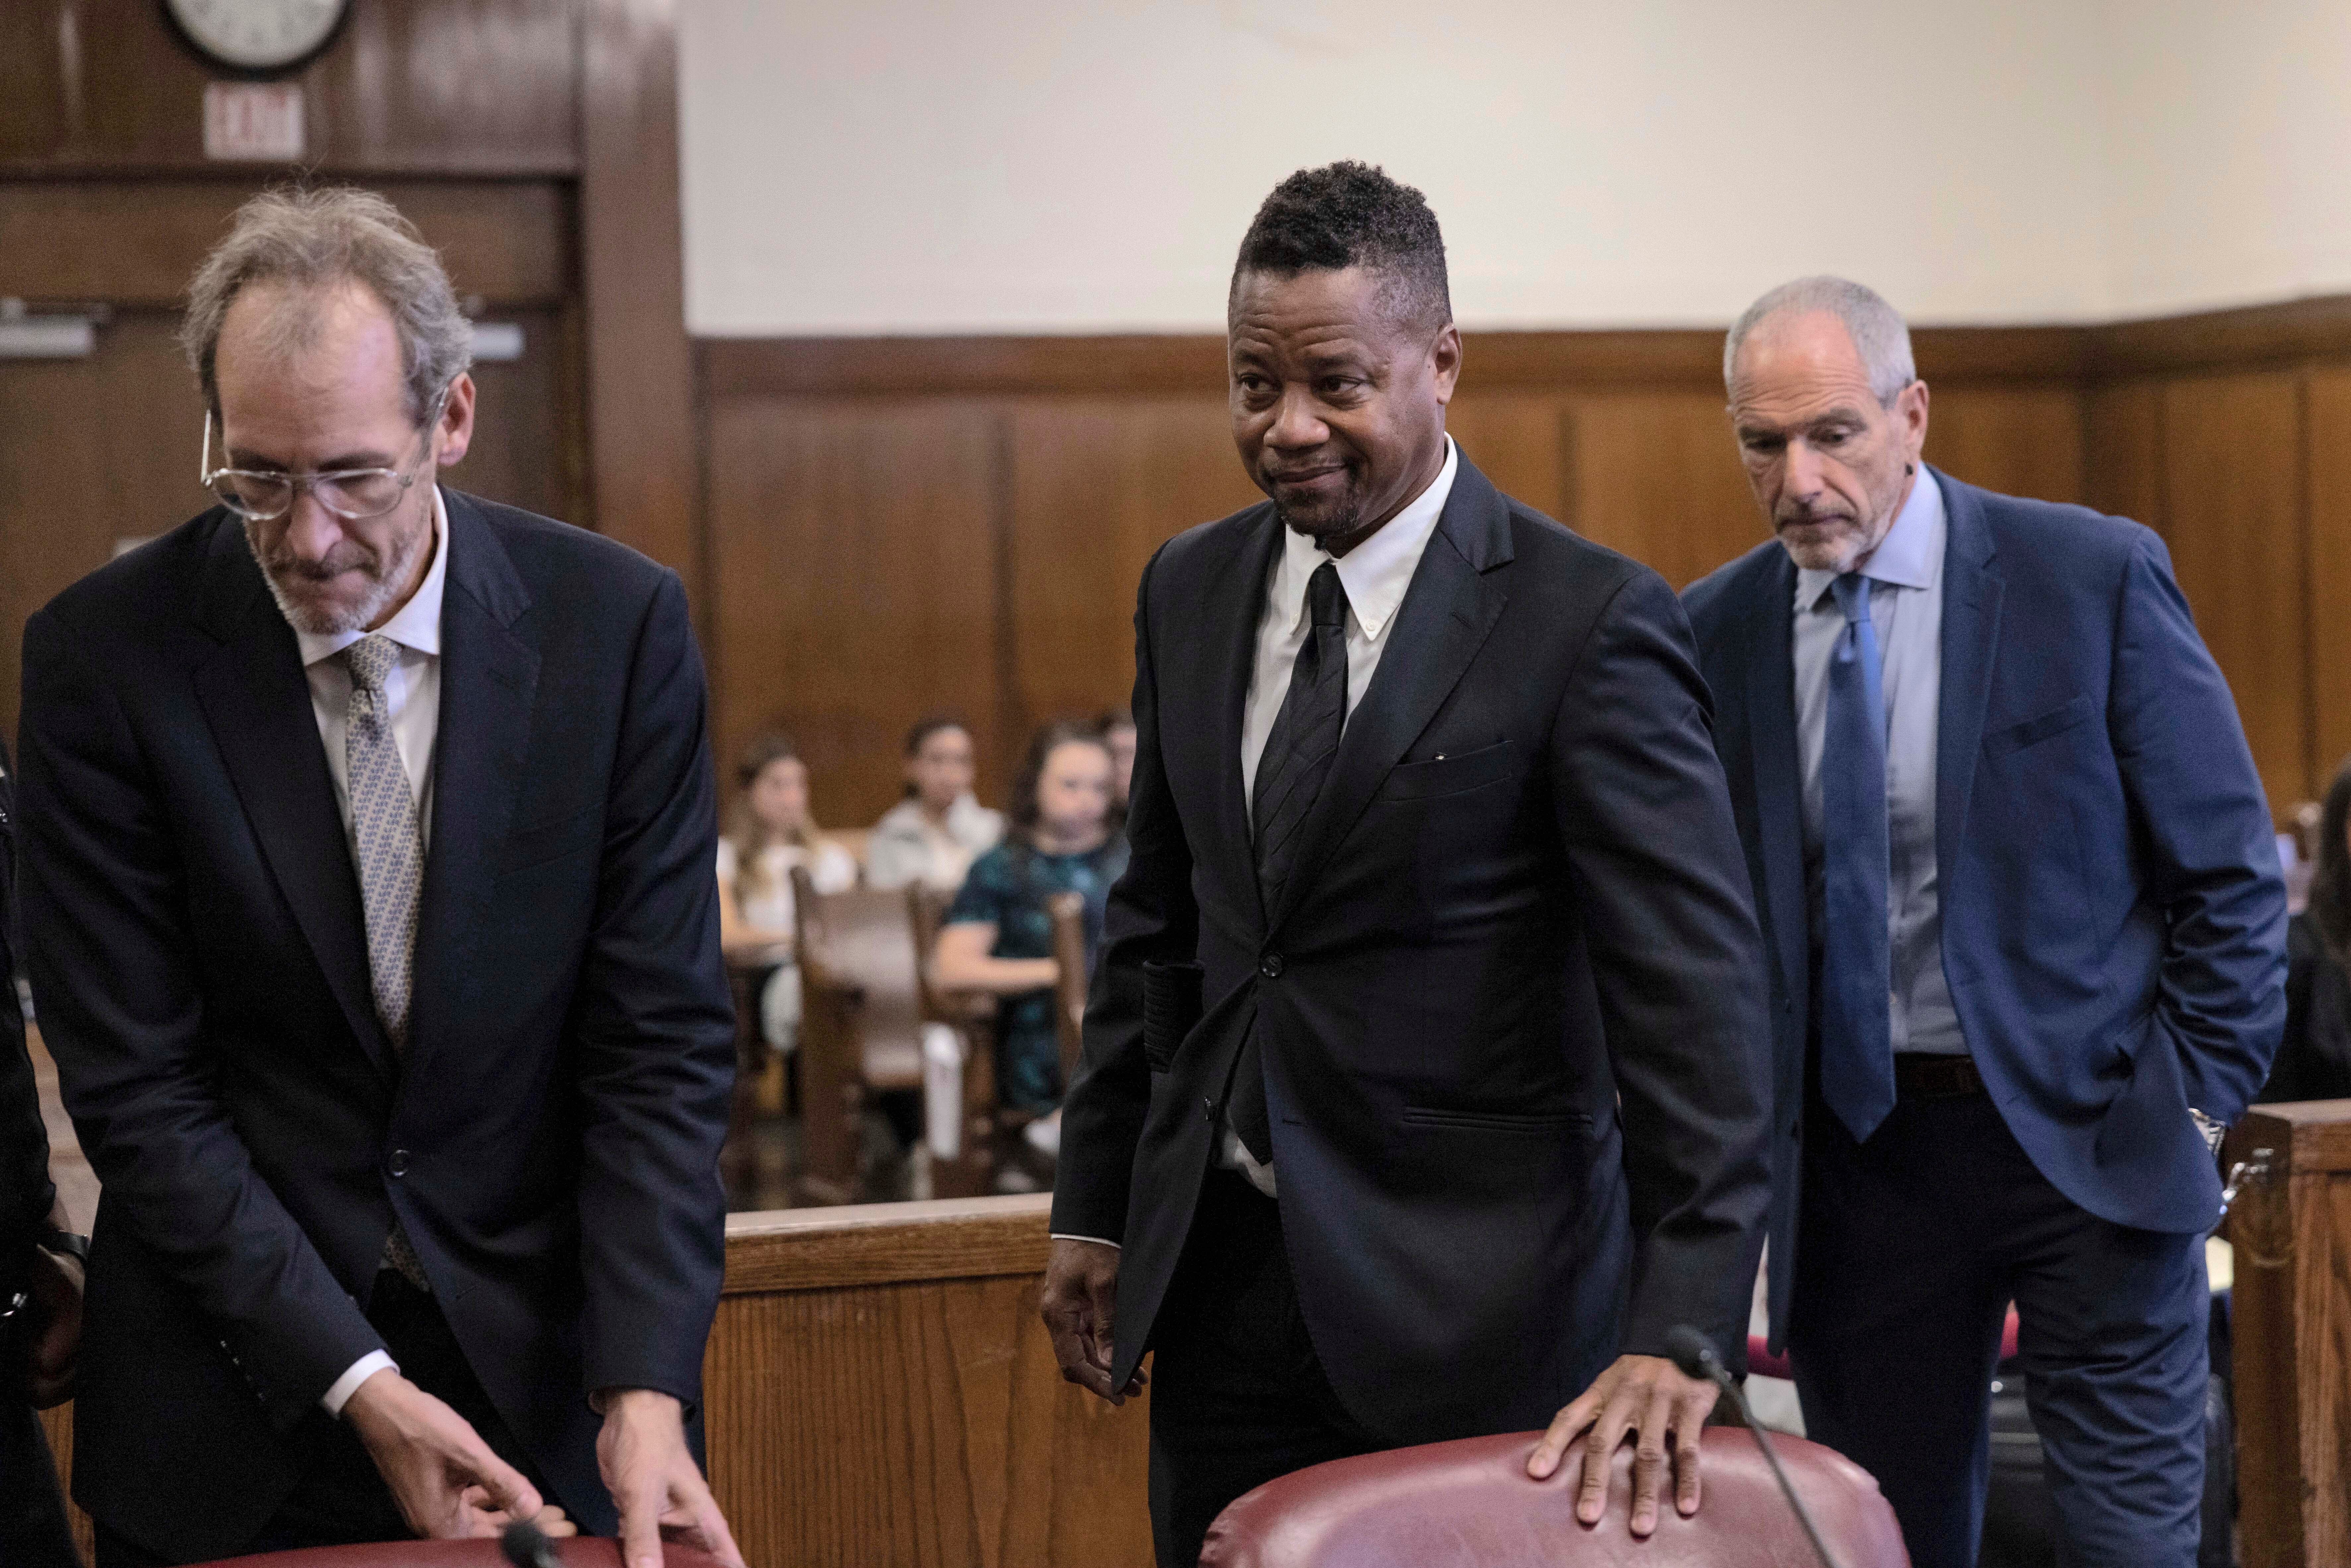 Cuba Gooding Jr has avoided jail time in forcible touching case